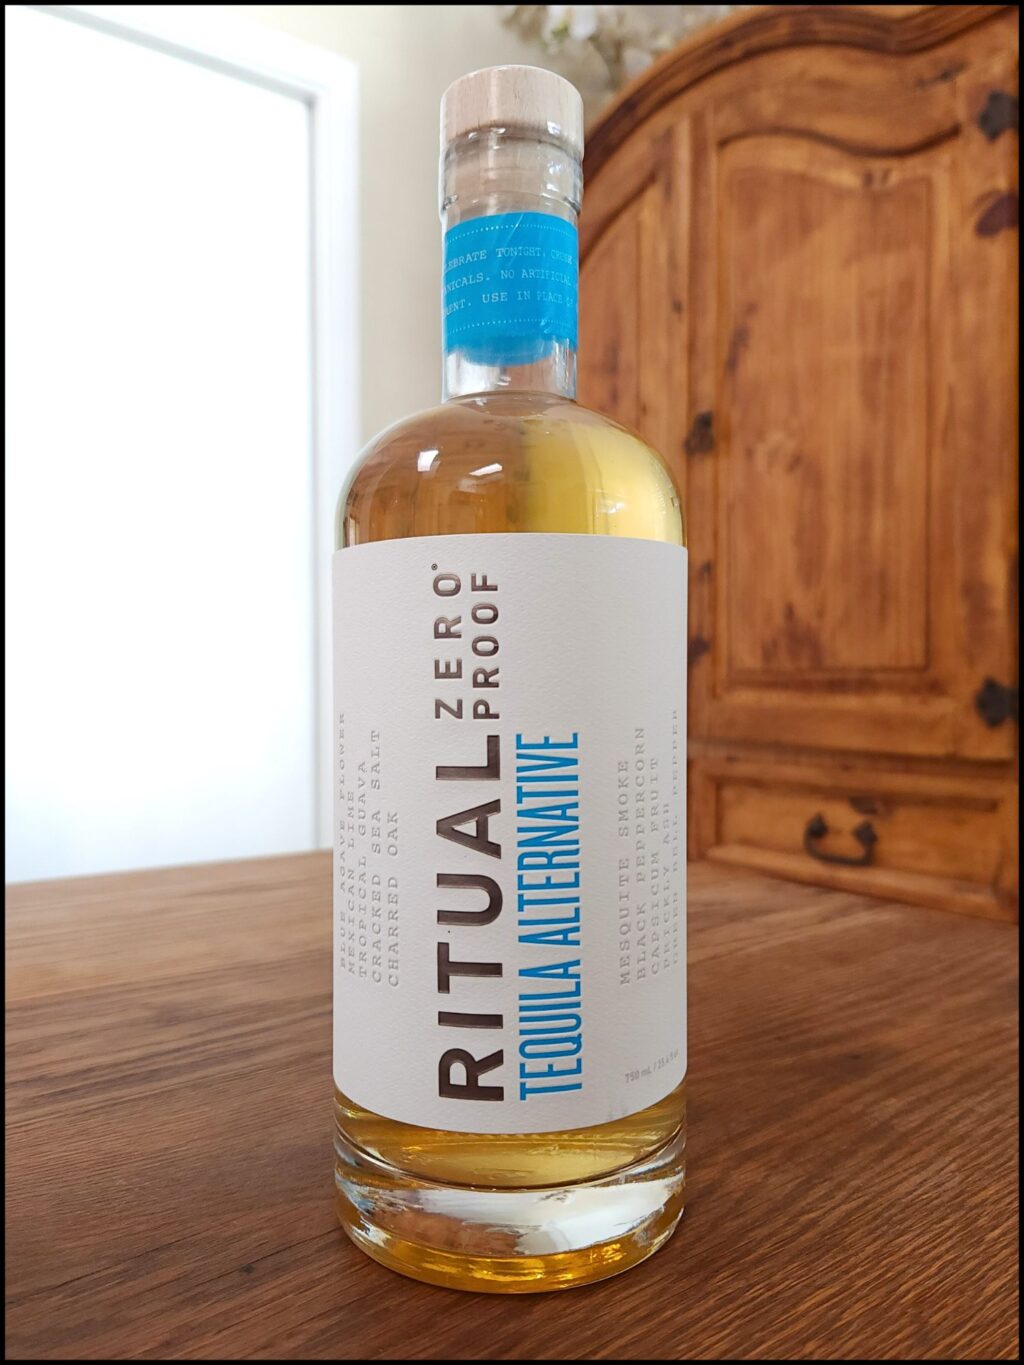 Bottle of Ritual Zero Proof Tequila alternative sitting on a wooden table, in front of a mixed white and wooden background